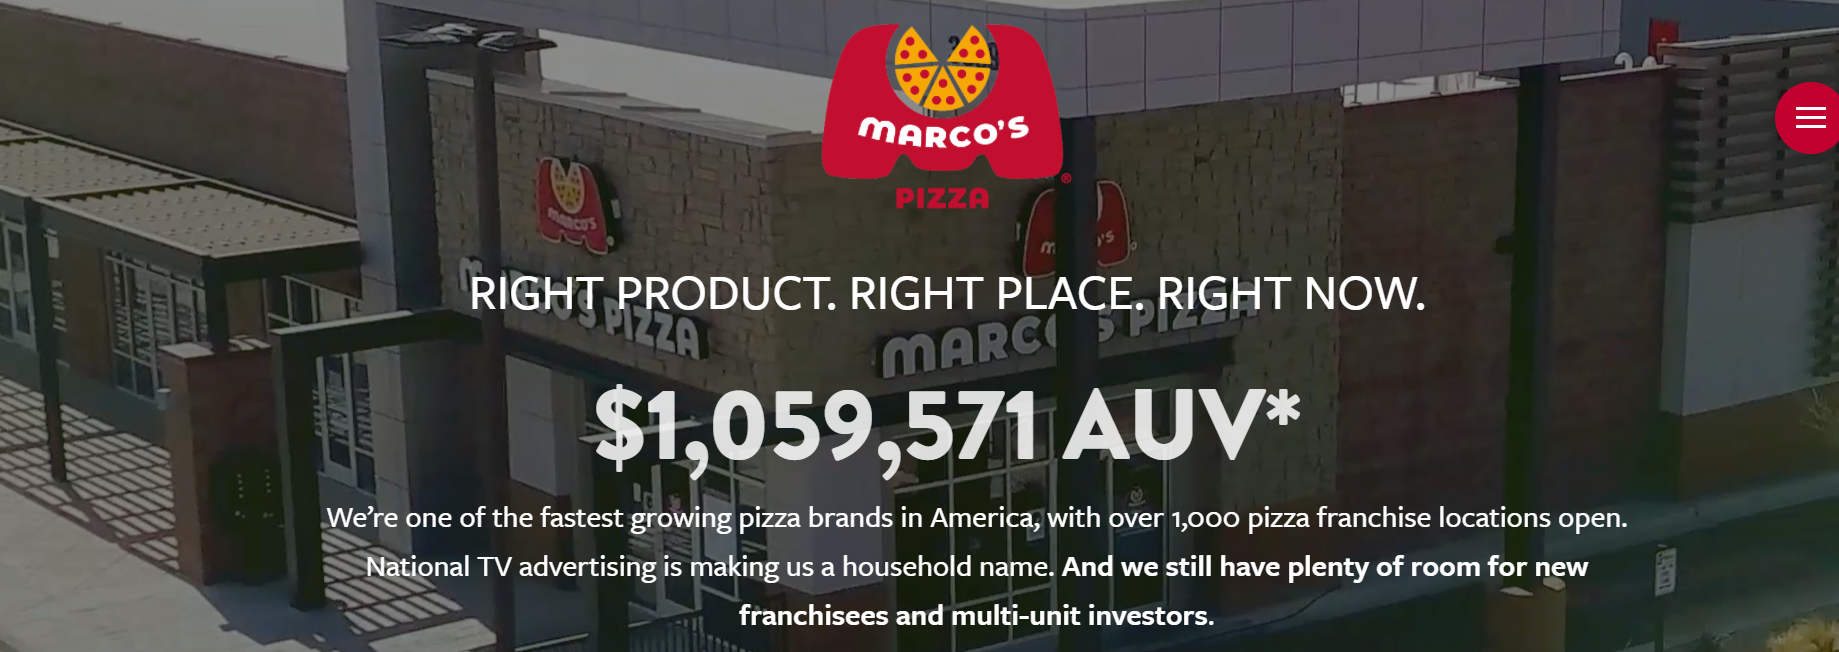 Featured image for “New Marco’s Pizza franchise website encourages multi-unit operators to add pizza to their portfolio”